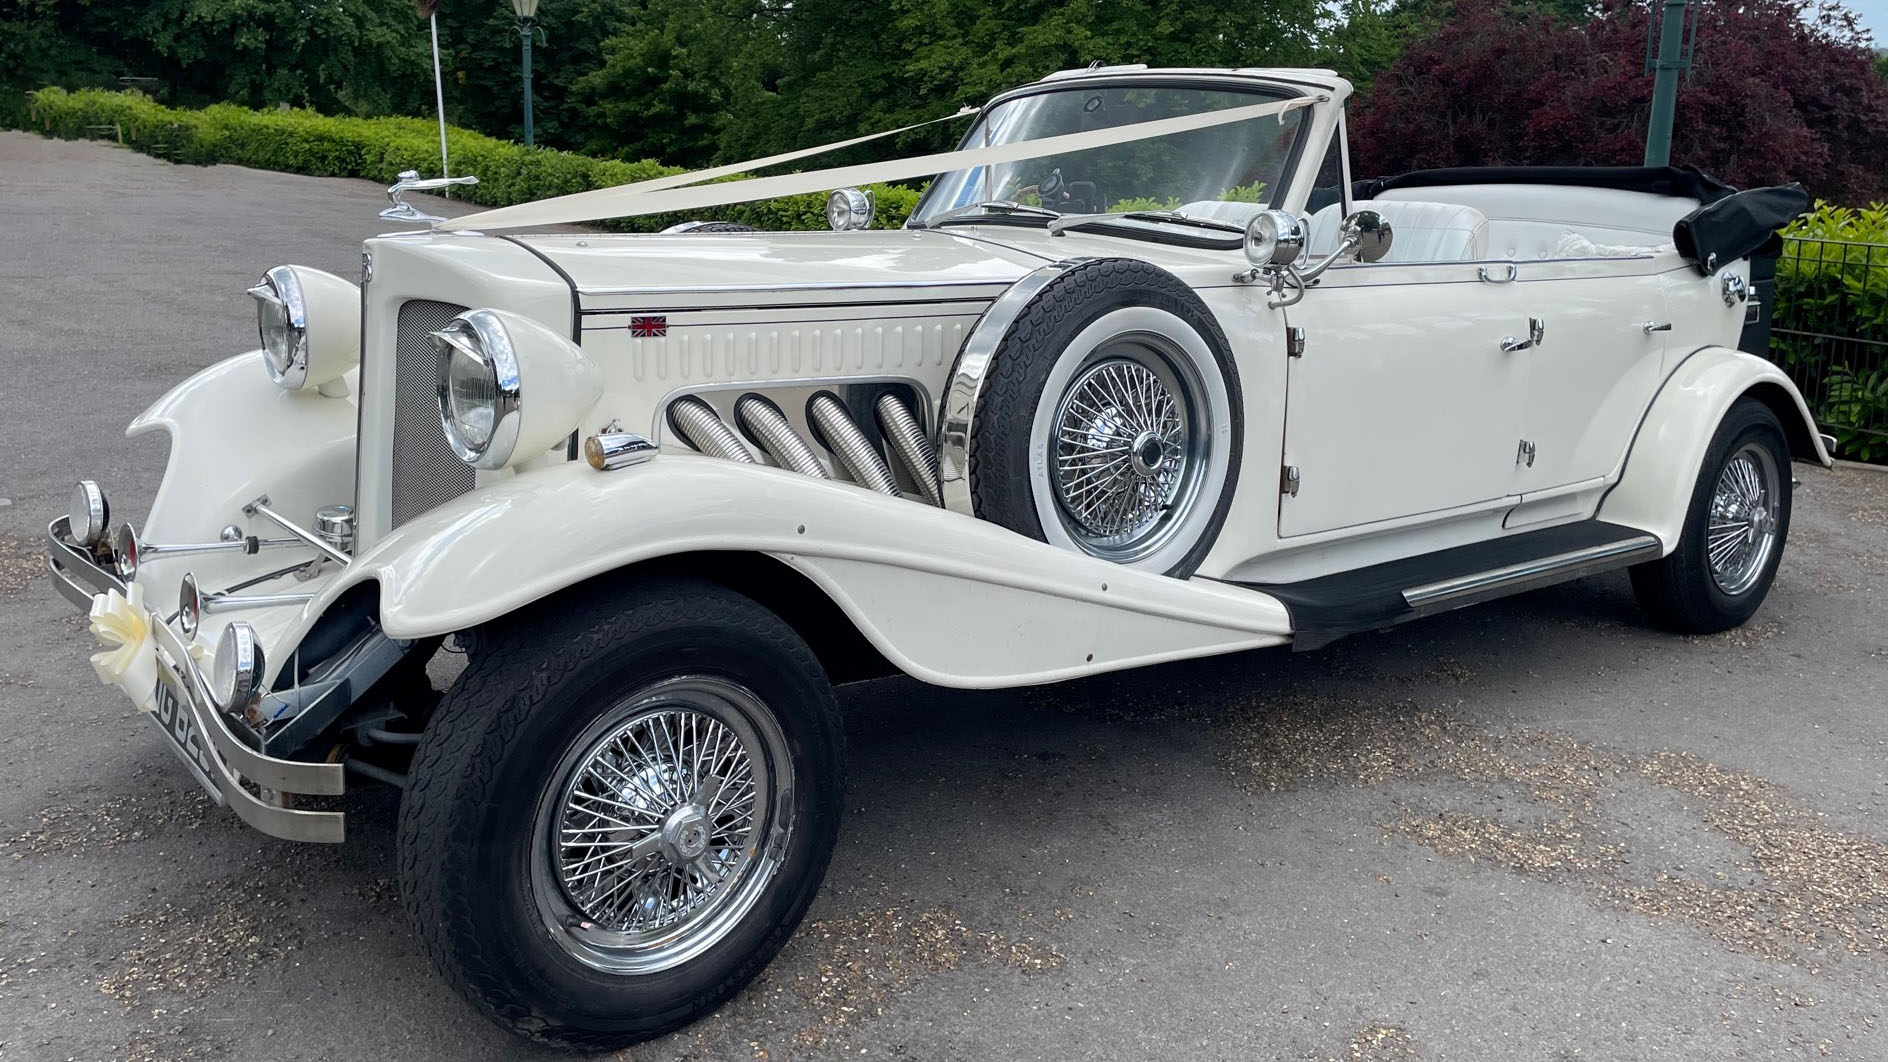 Beauford 4 Door Convertible wedding car for hire in Enfield, London